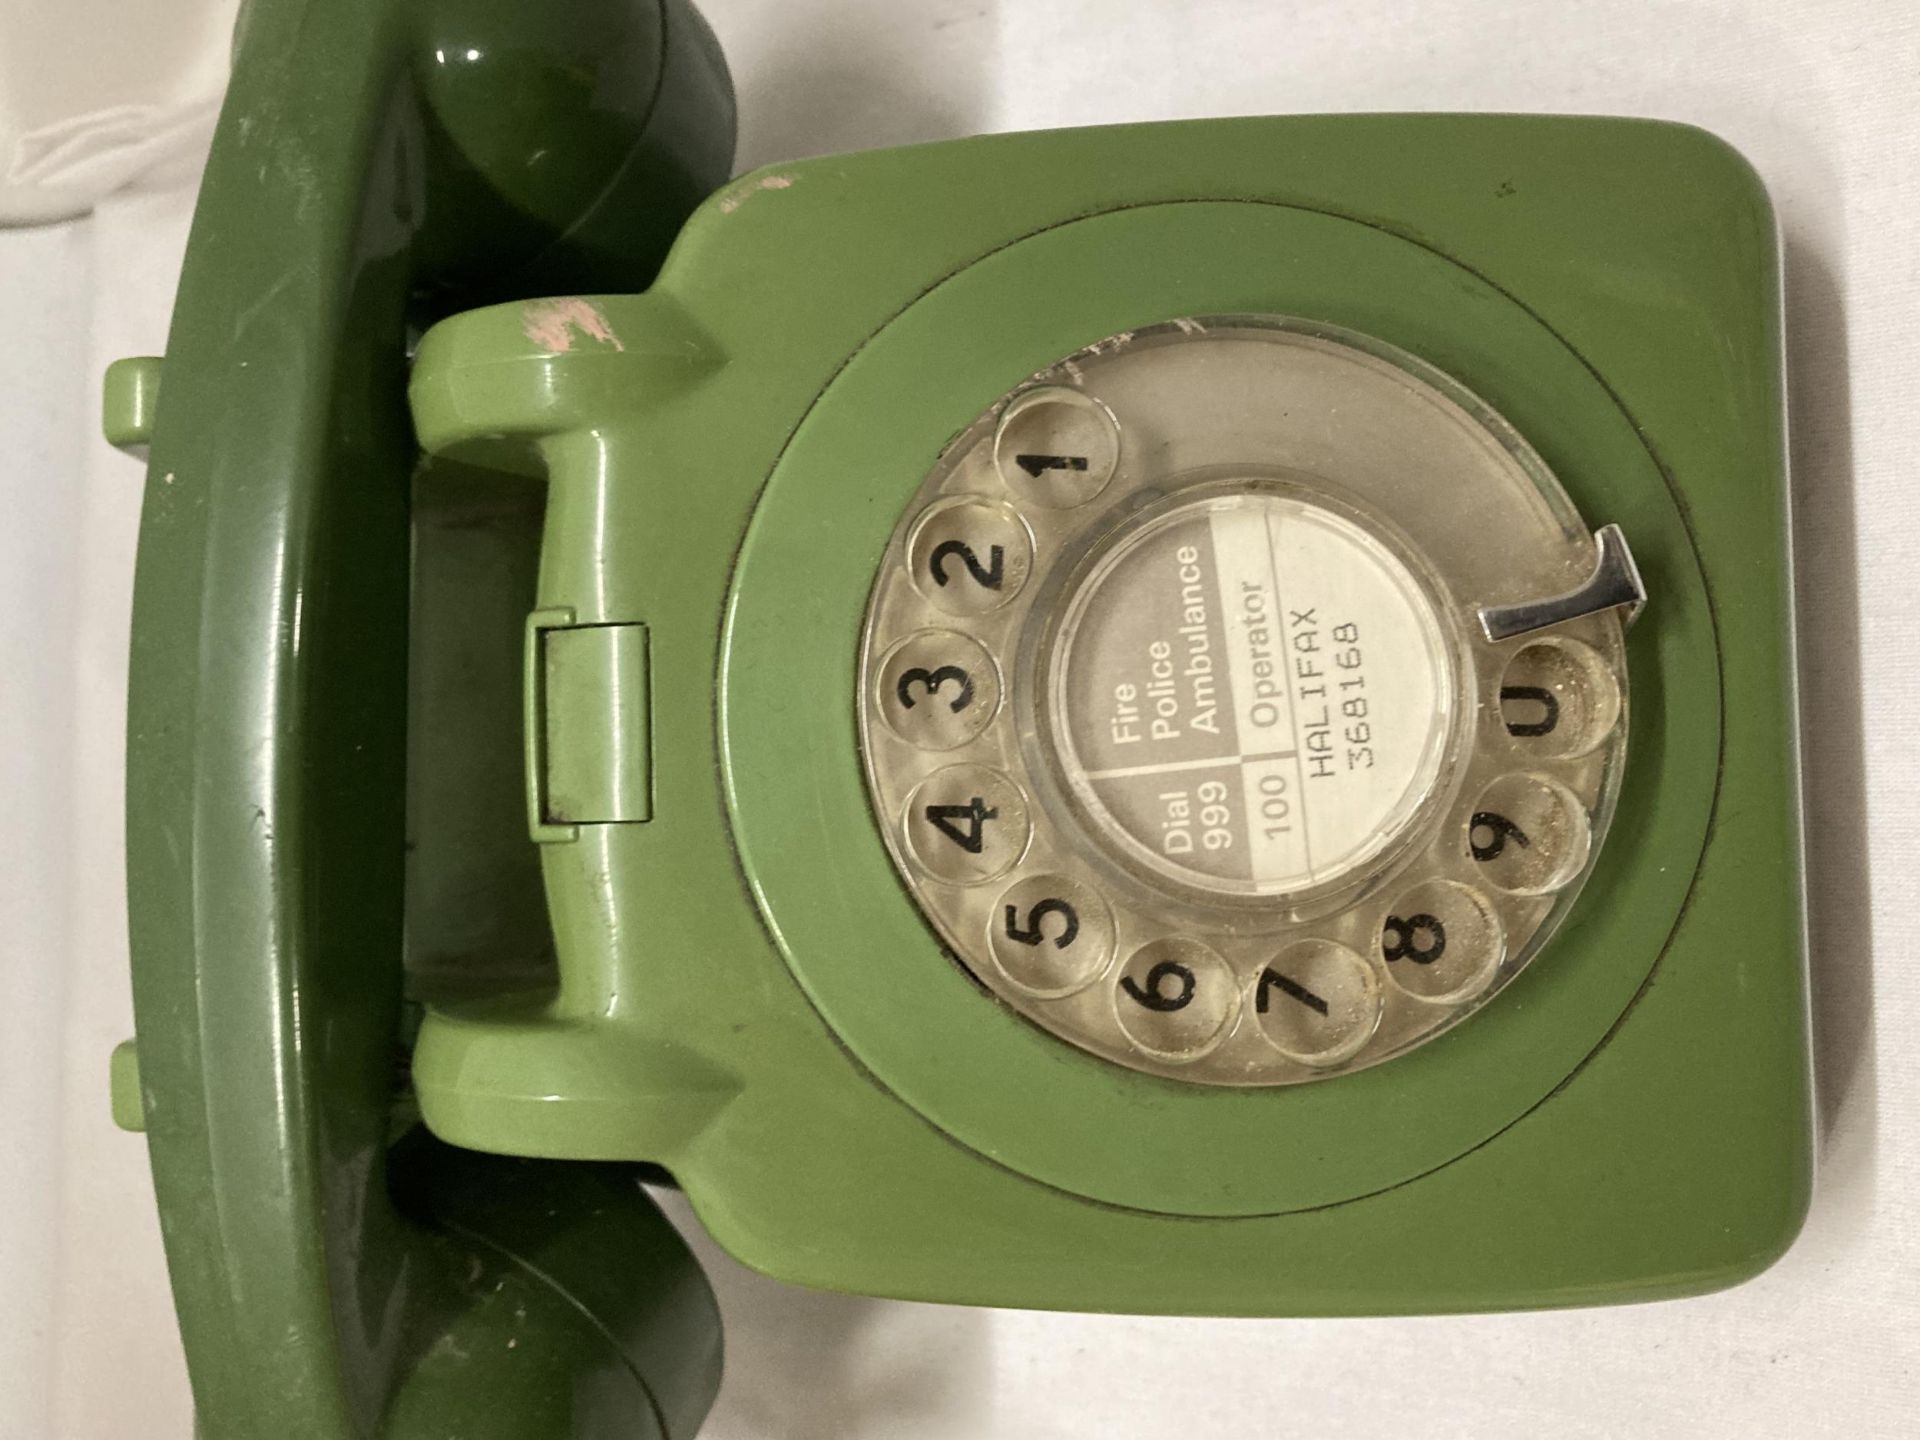 TWO VINTAGE DIAL UP TELEPHONES - CREAM AND GREEN - Image 3 of 4